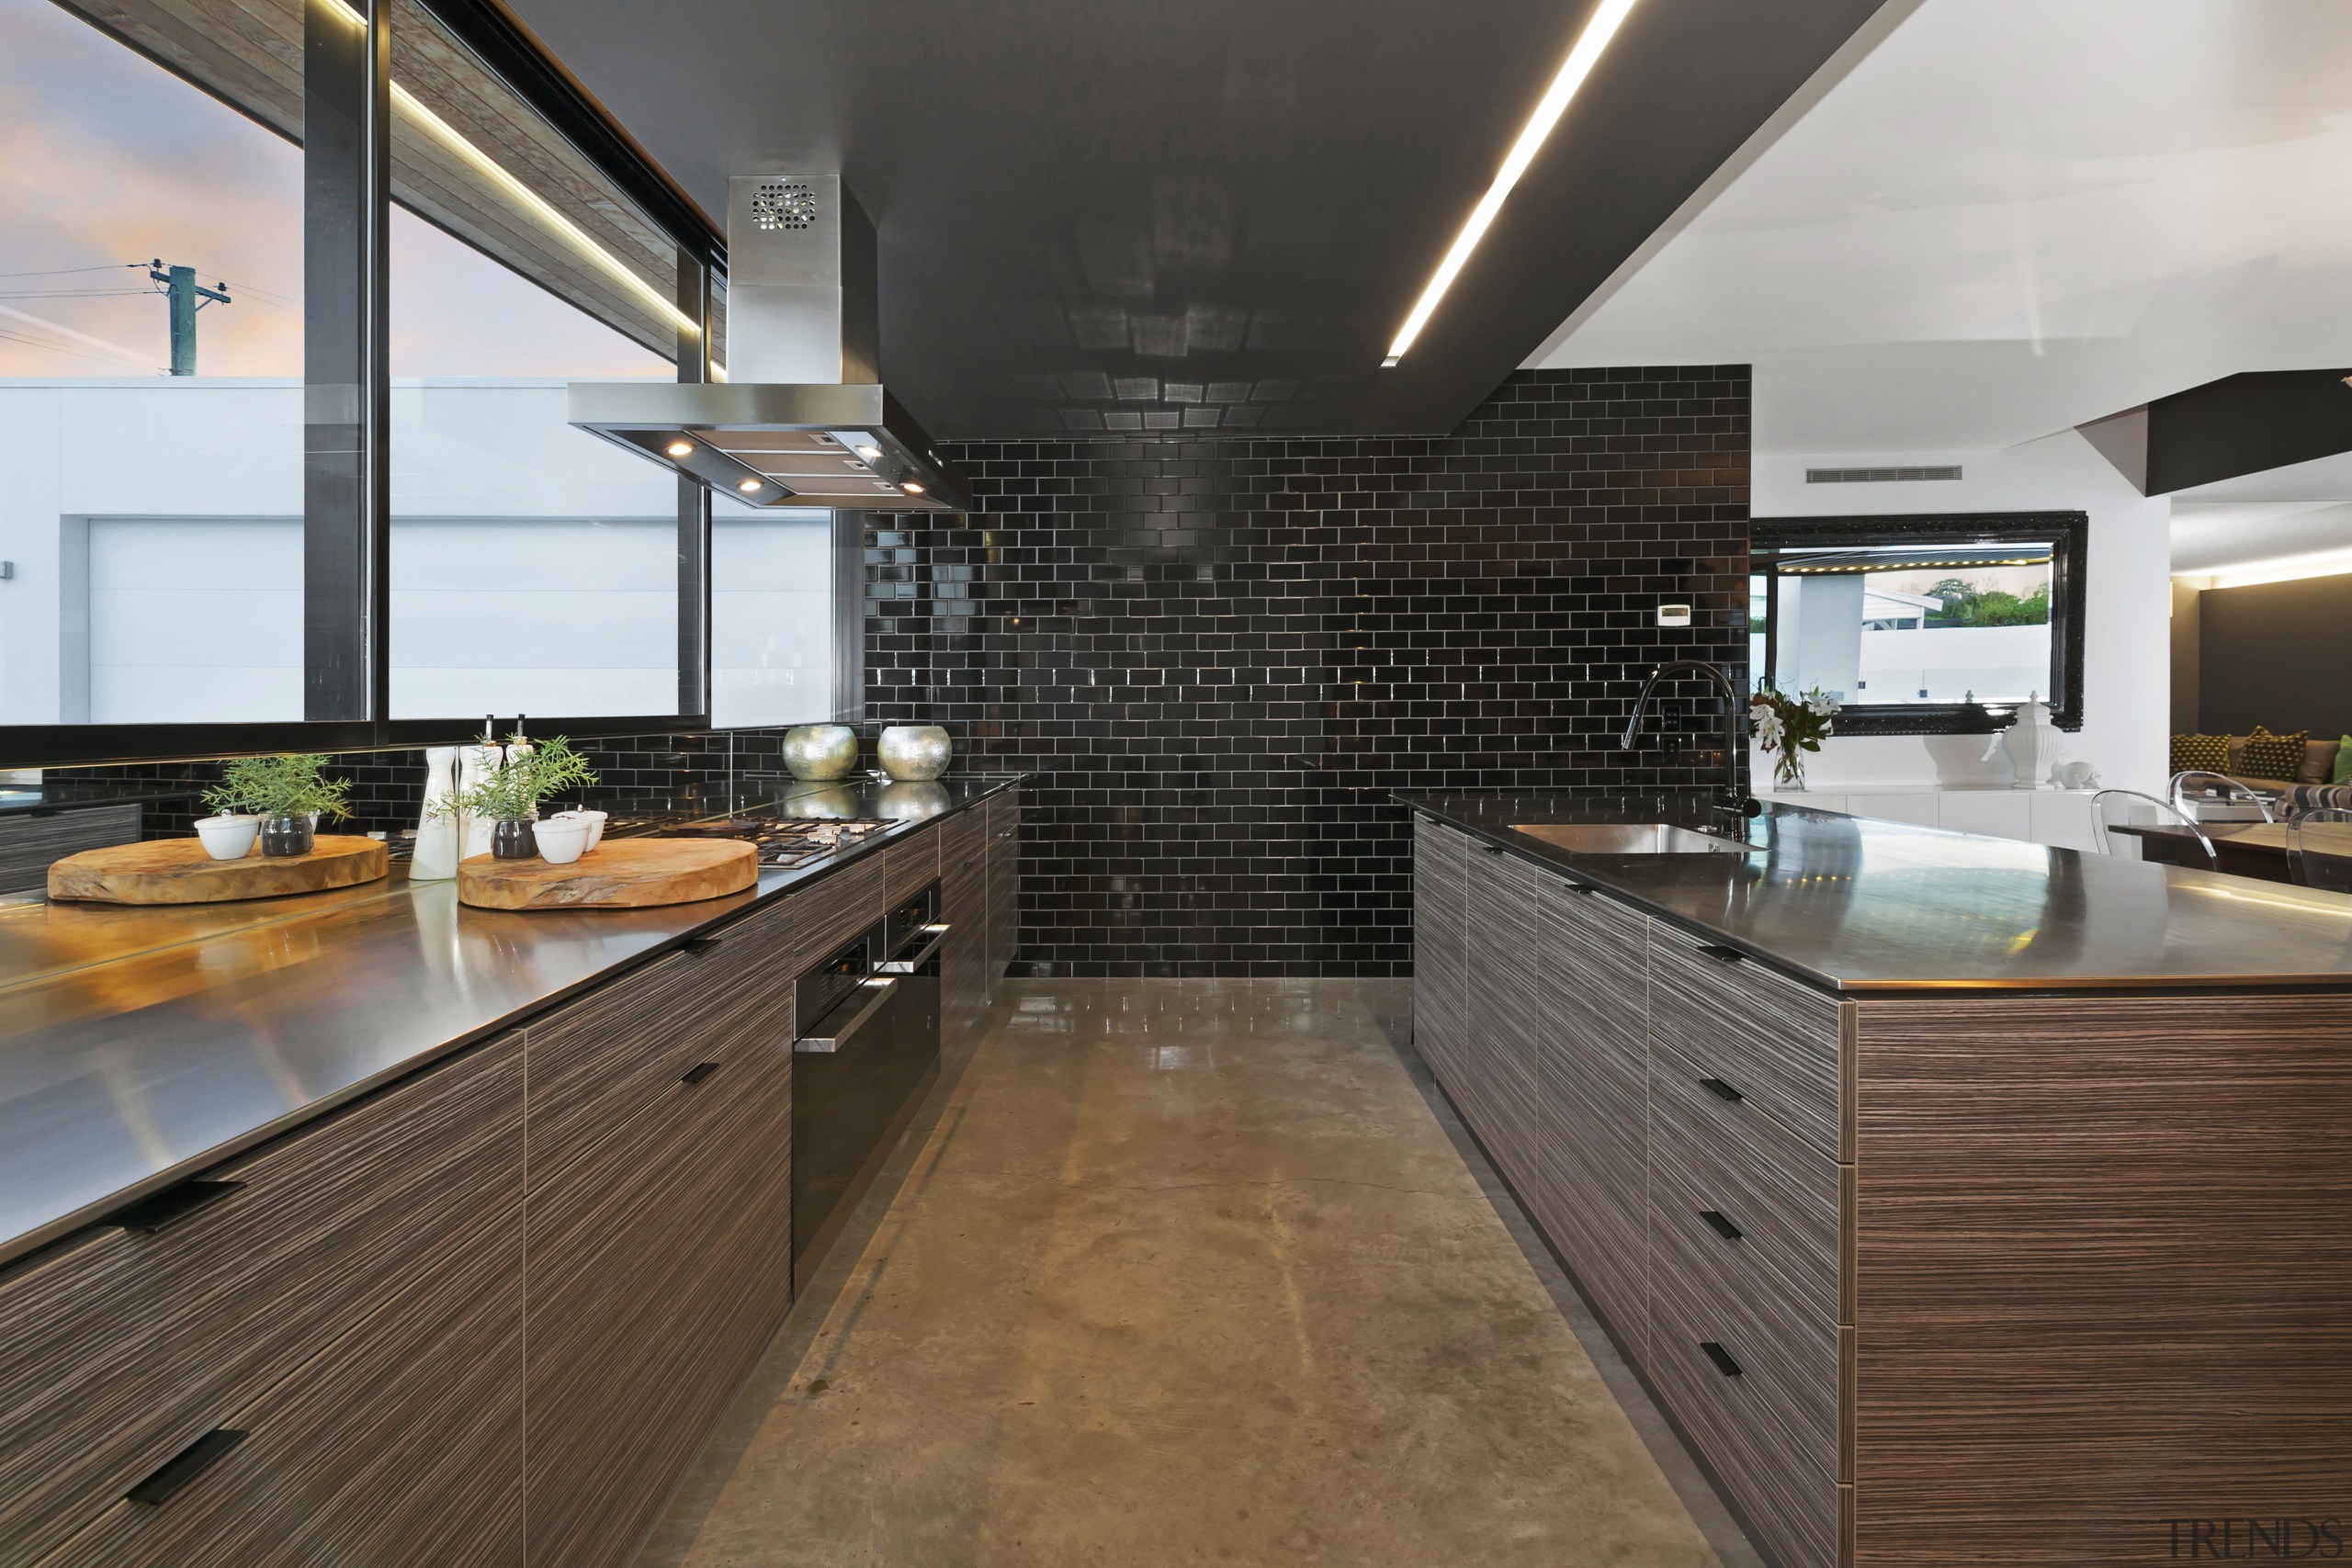 Black ceramic tiles create a feature wall in cabinetry, countertop, interior design, kitchen, real estate, brown, gray